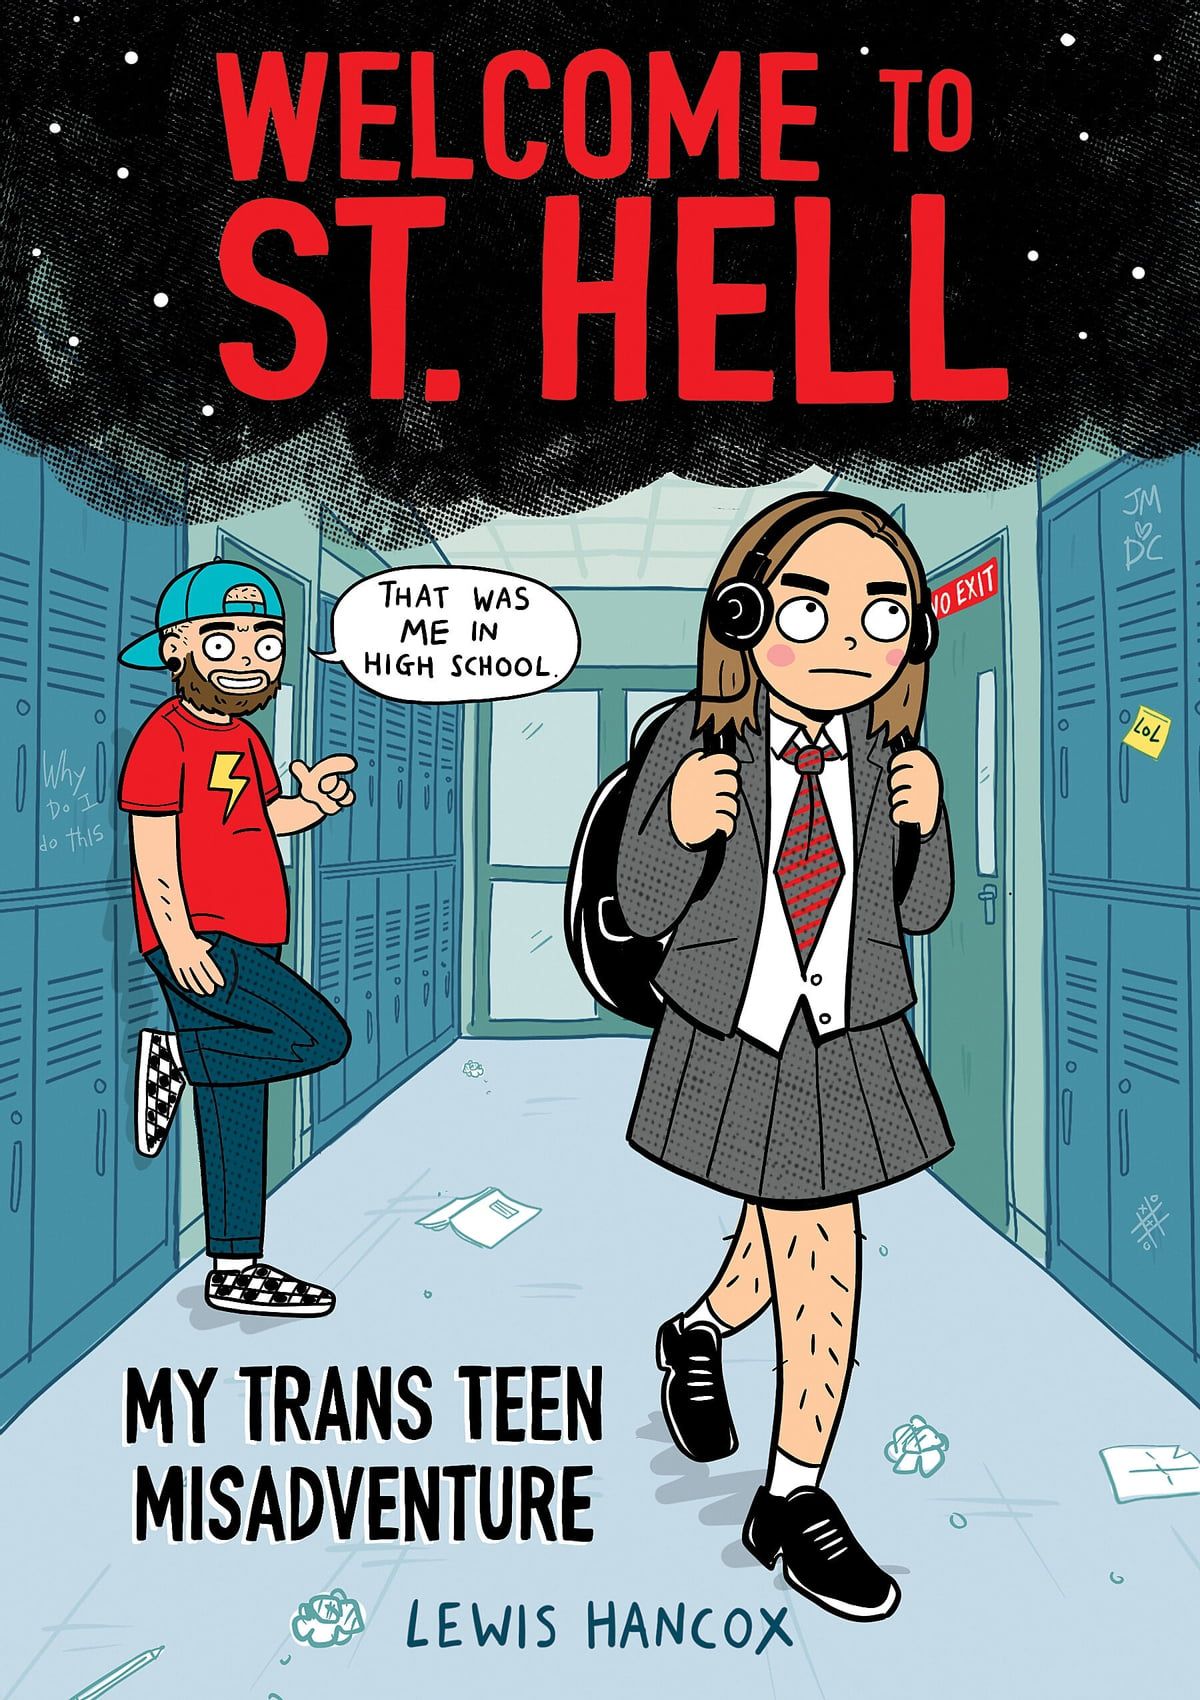 A person walking in a girl’s private school uniform down a high school hallway showing off hairy legs while another person with a hat, beard, and lighting bolt t-shirt points and says “That was me in high school” on the cover of Welcome to St. Hell: My Trans Teen Misadventure